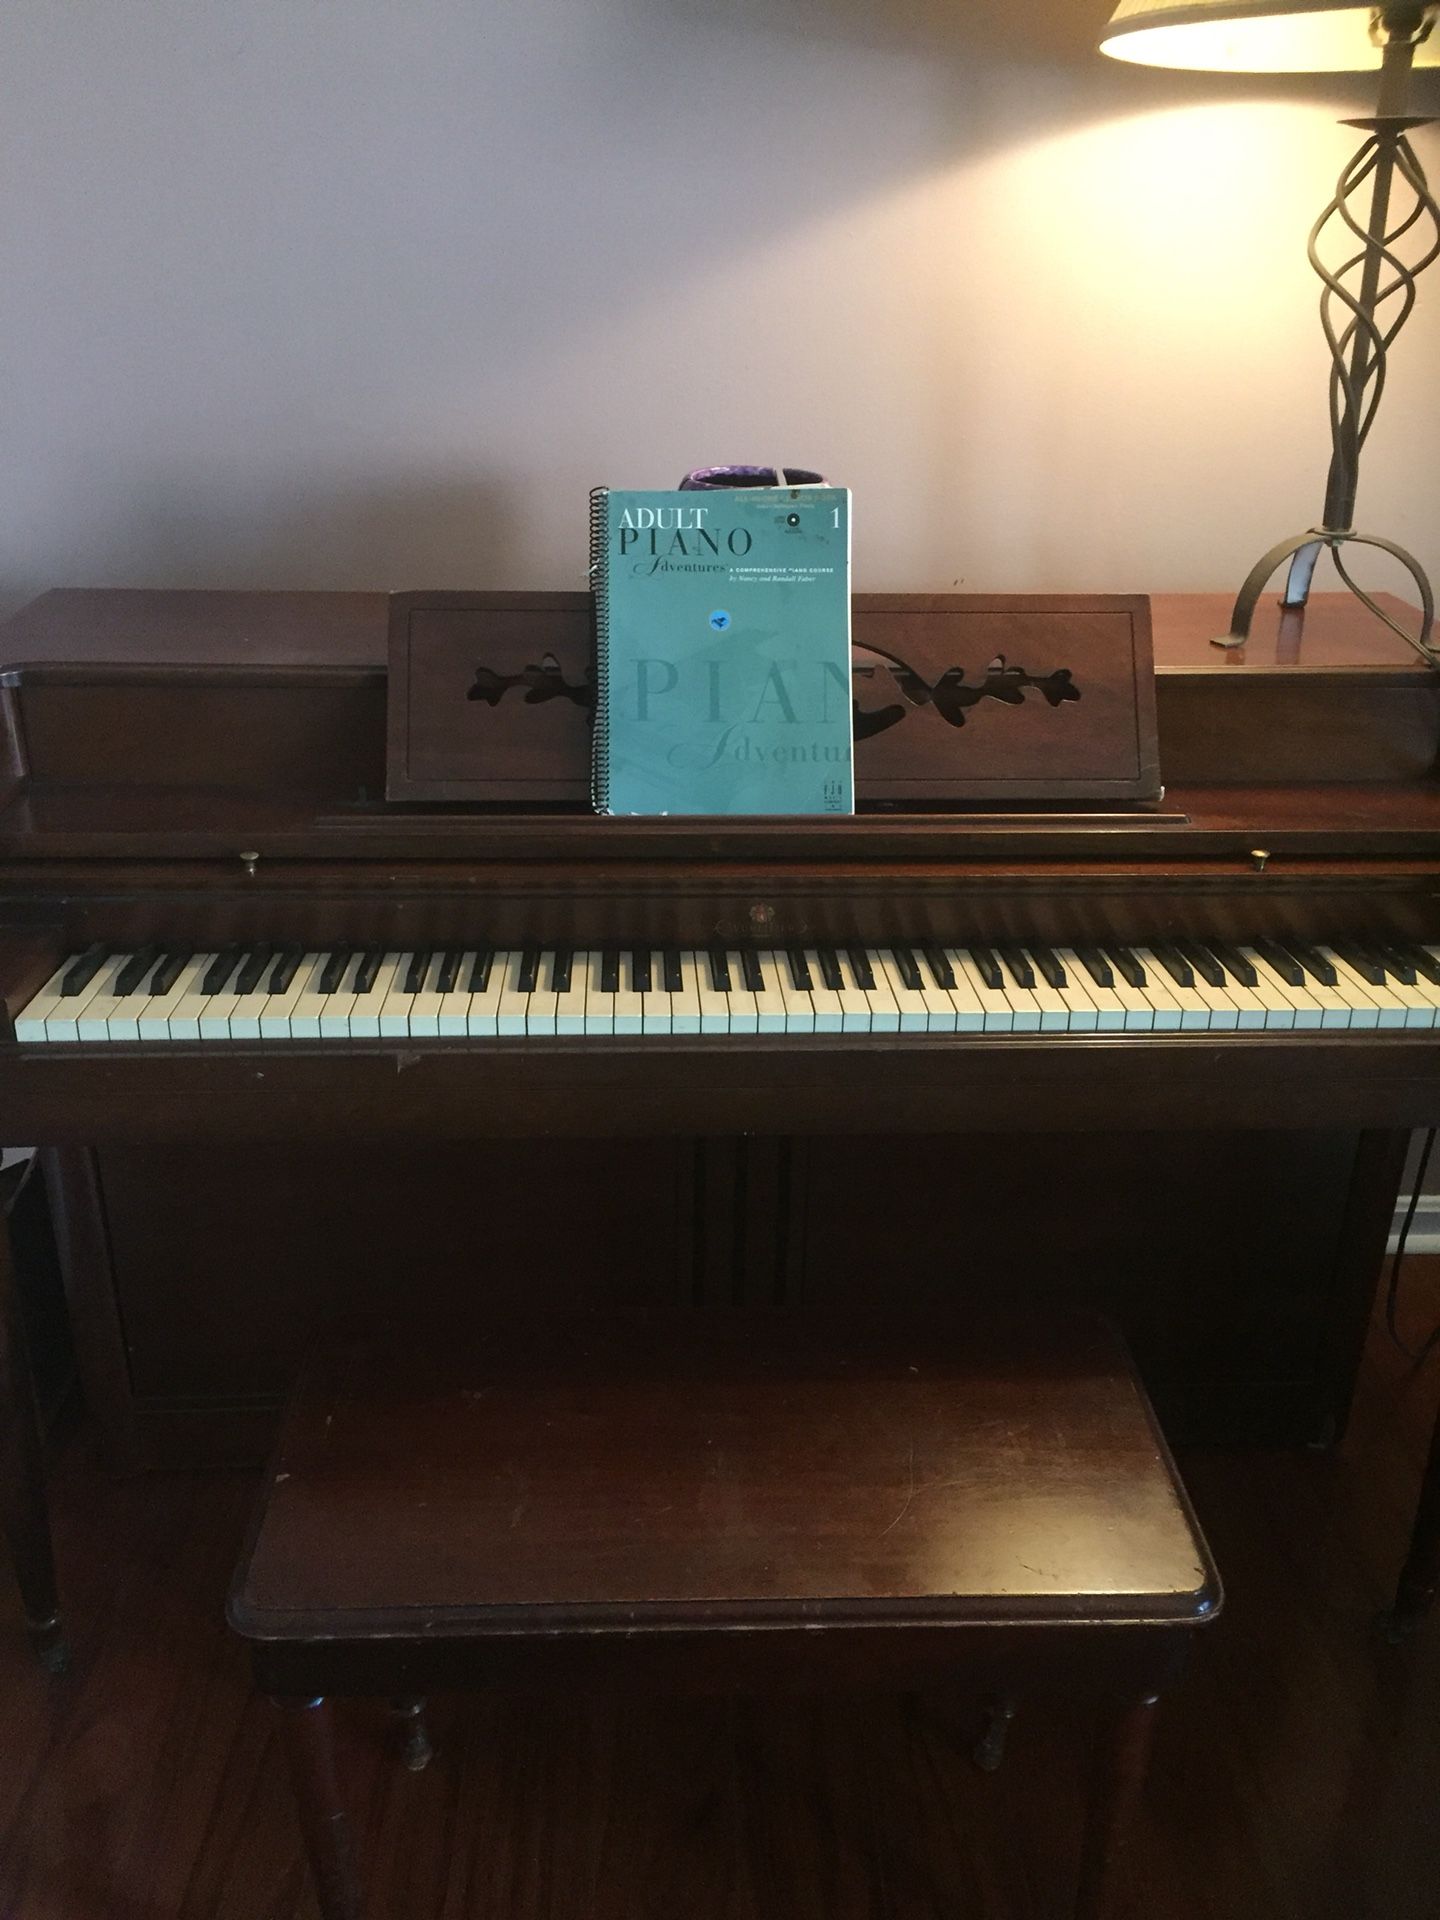 No longer used piano in search of a good home where someone will actually play it. Free. Just pick it up by July 31.